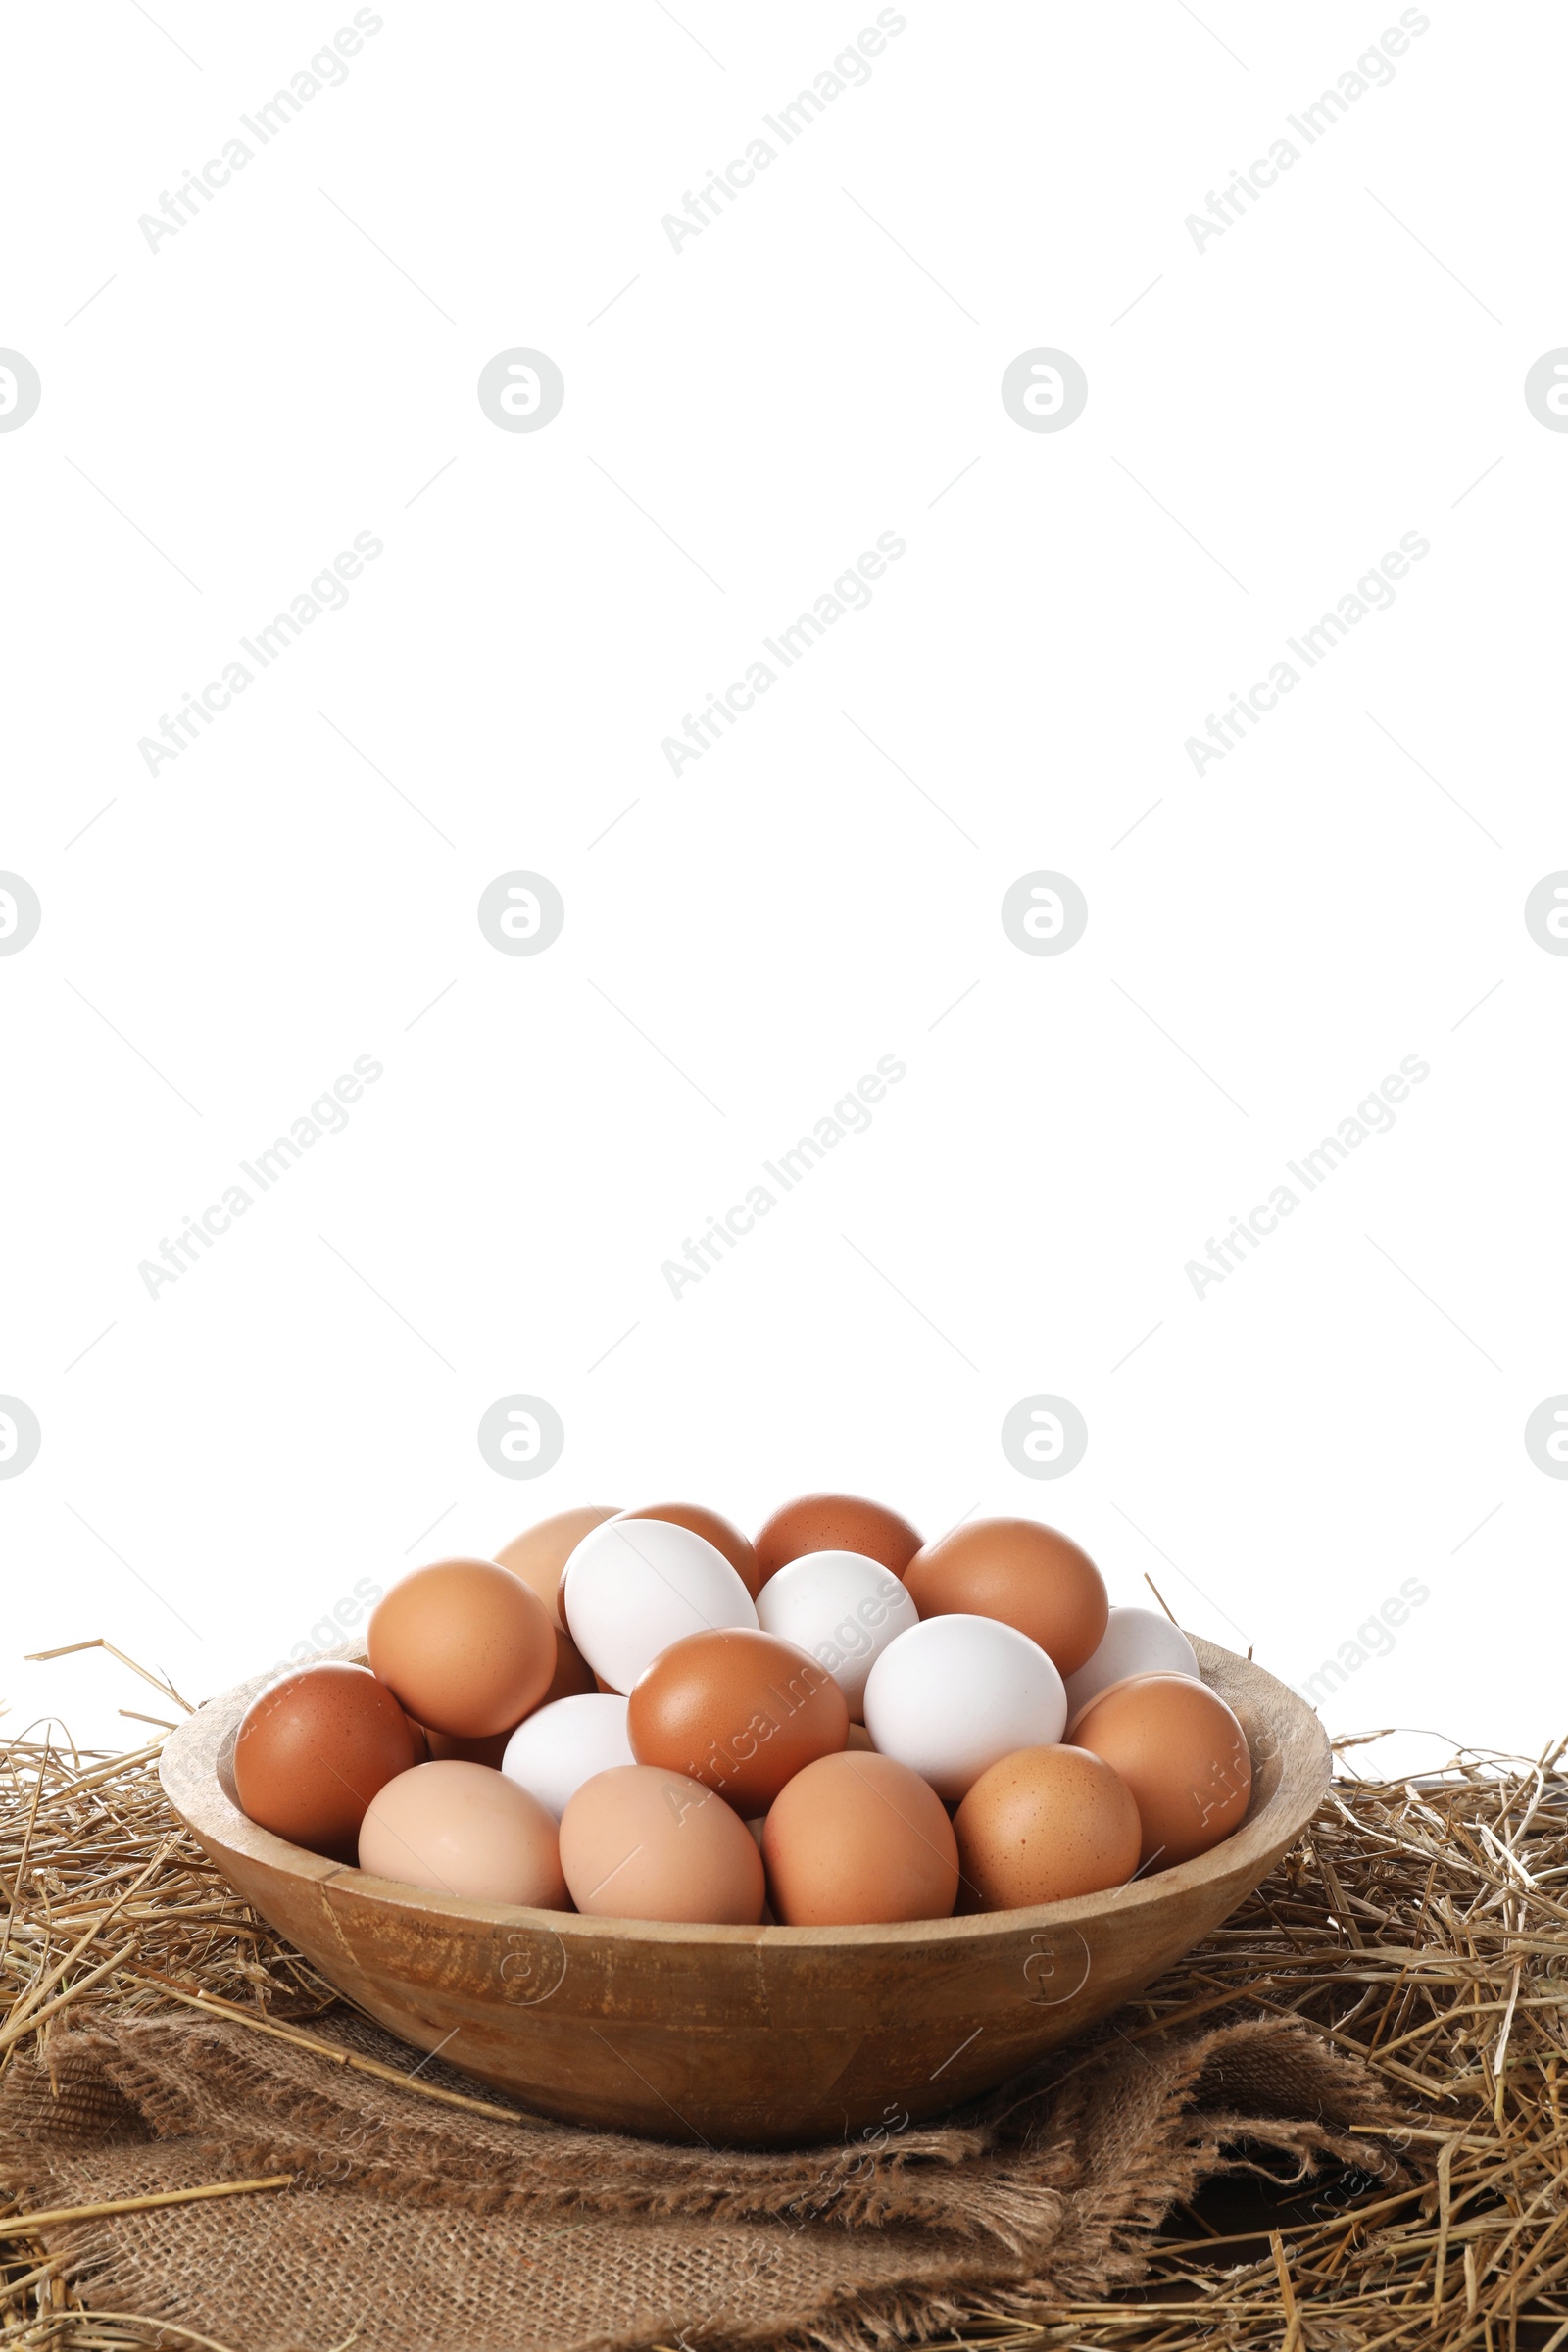 Photo of Fresh chicken eggs in bowl and dried straw on table against white background